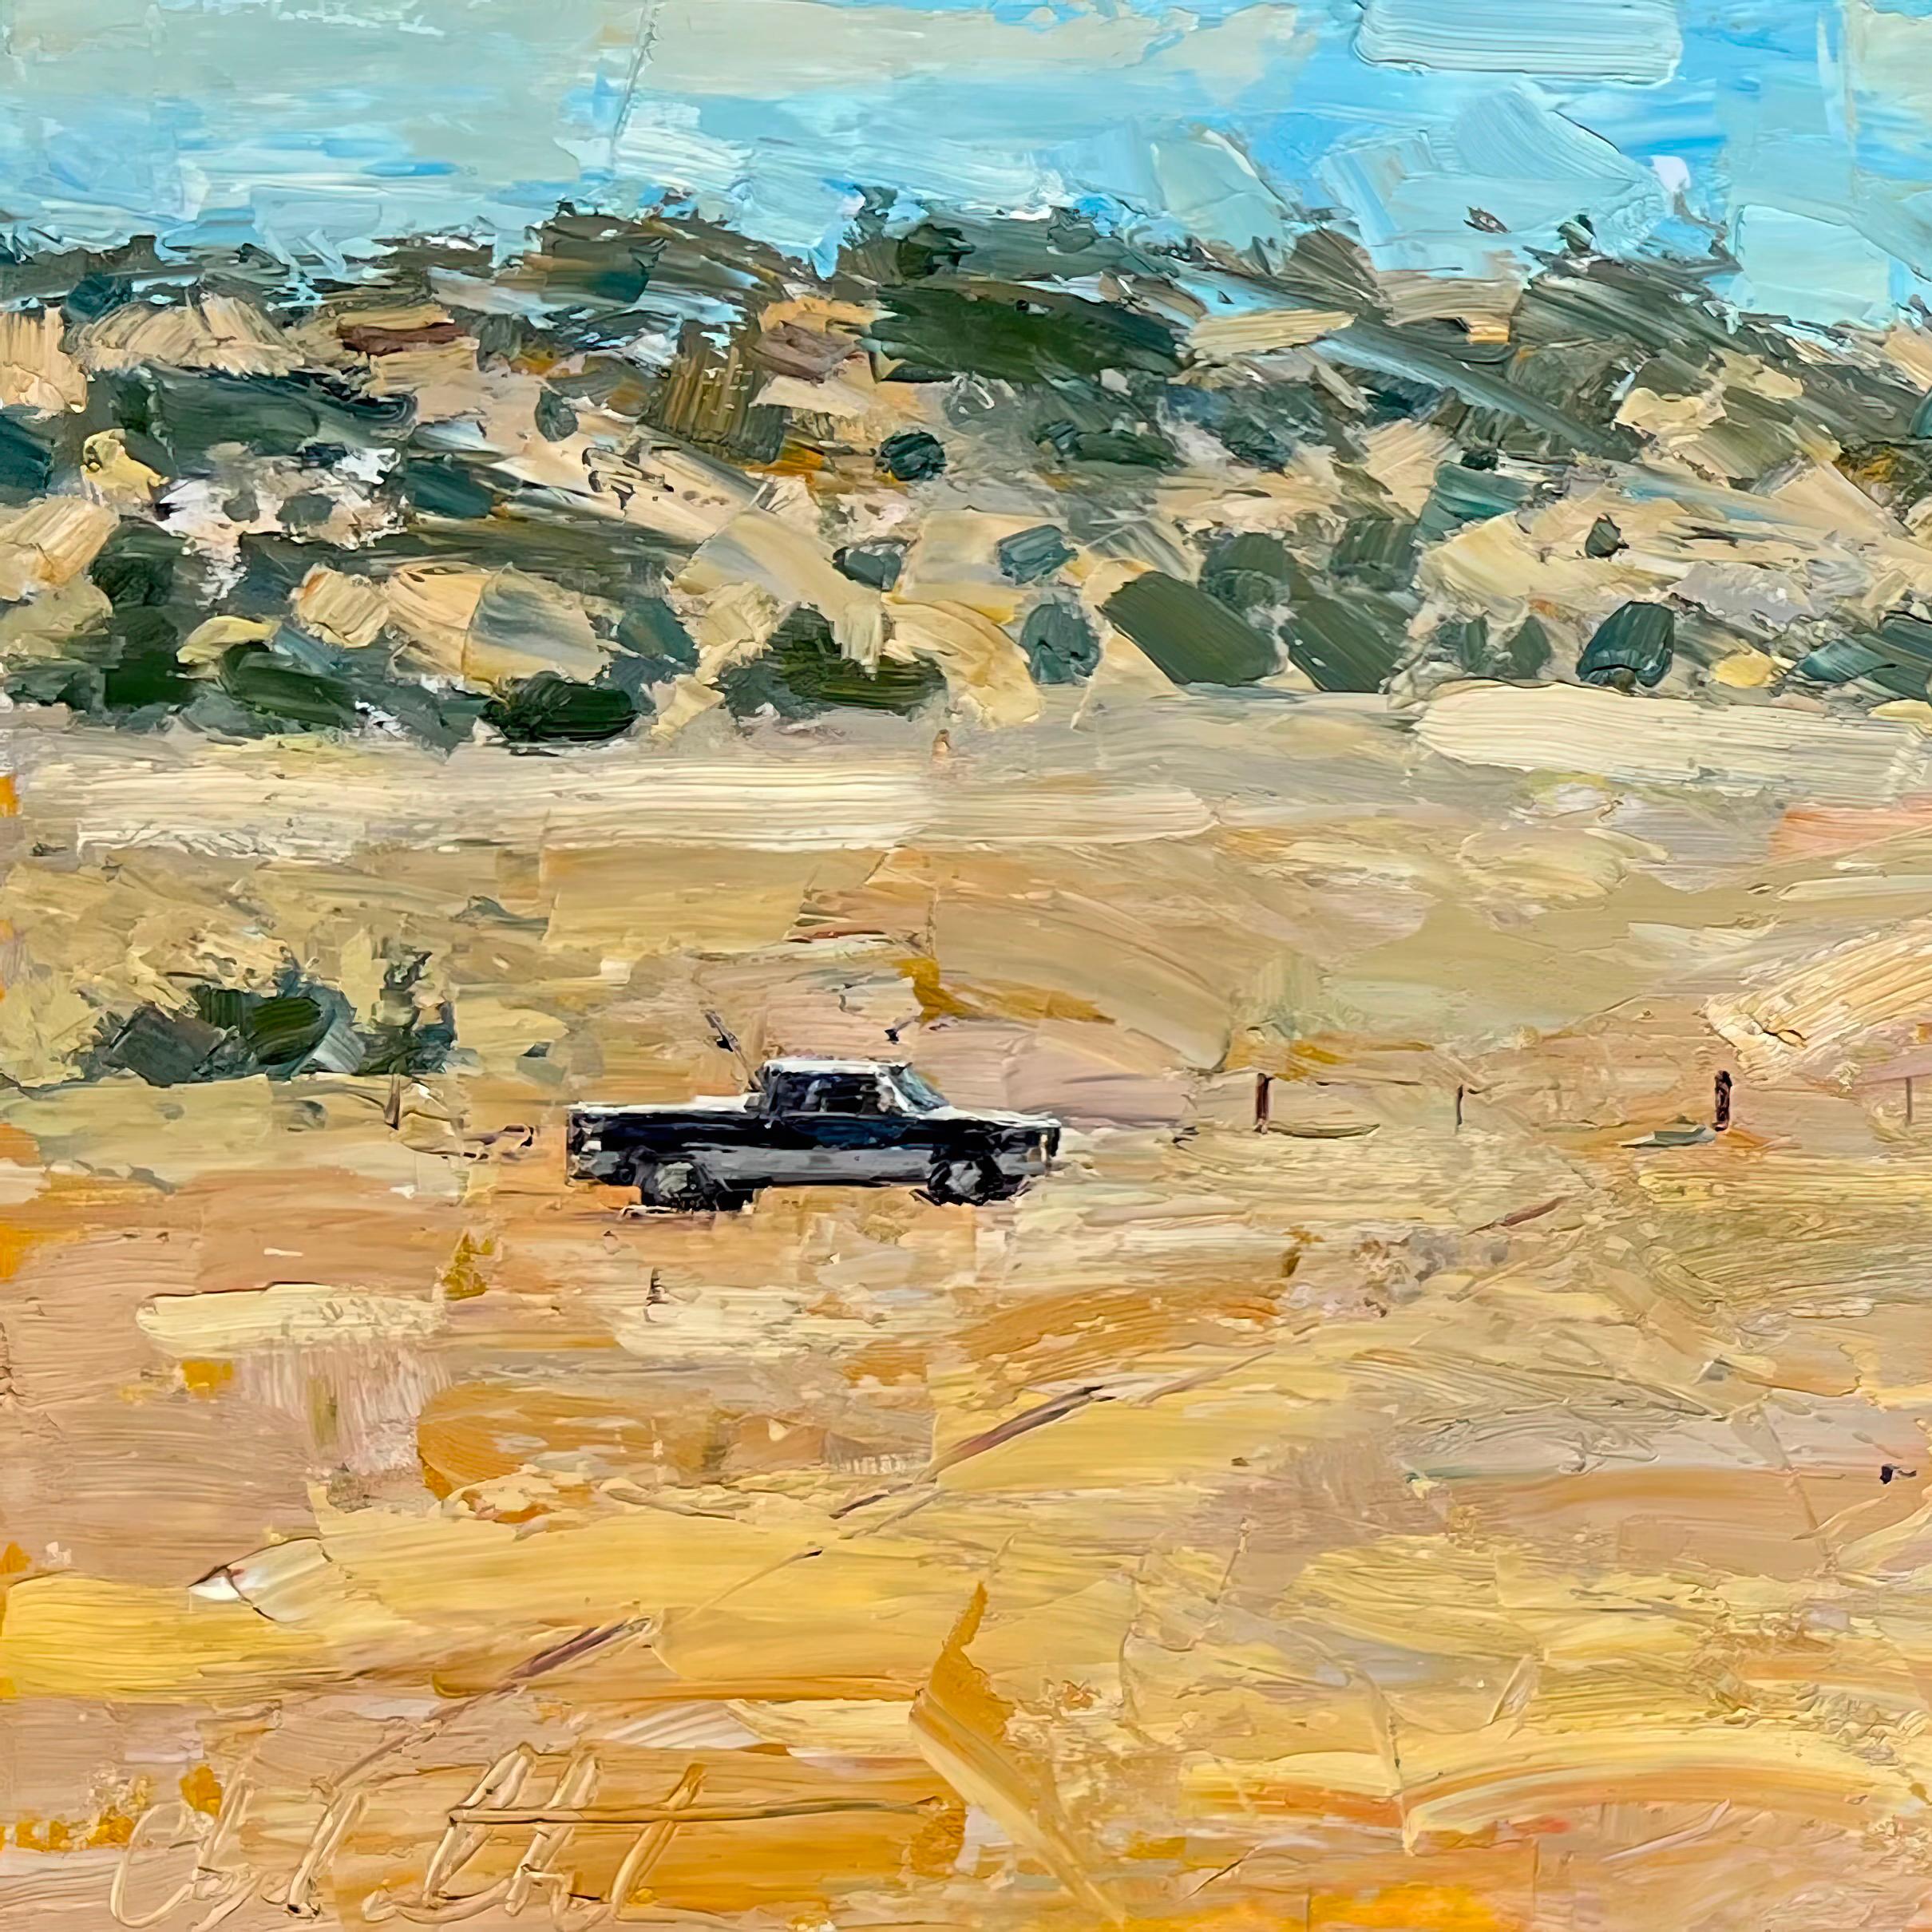 Taking Care of Business, Original Oil Painting - Beige Landscape Painting by Clyde Steadman